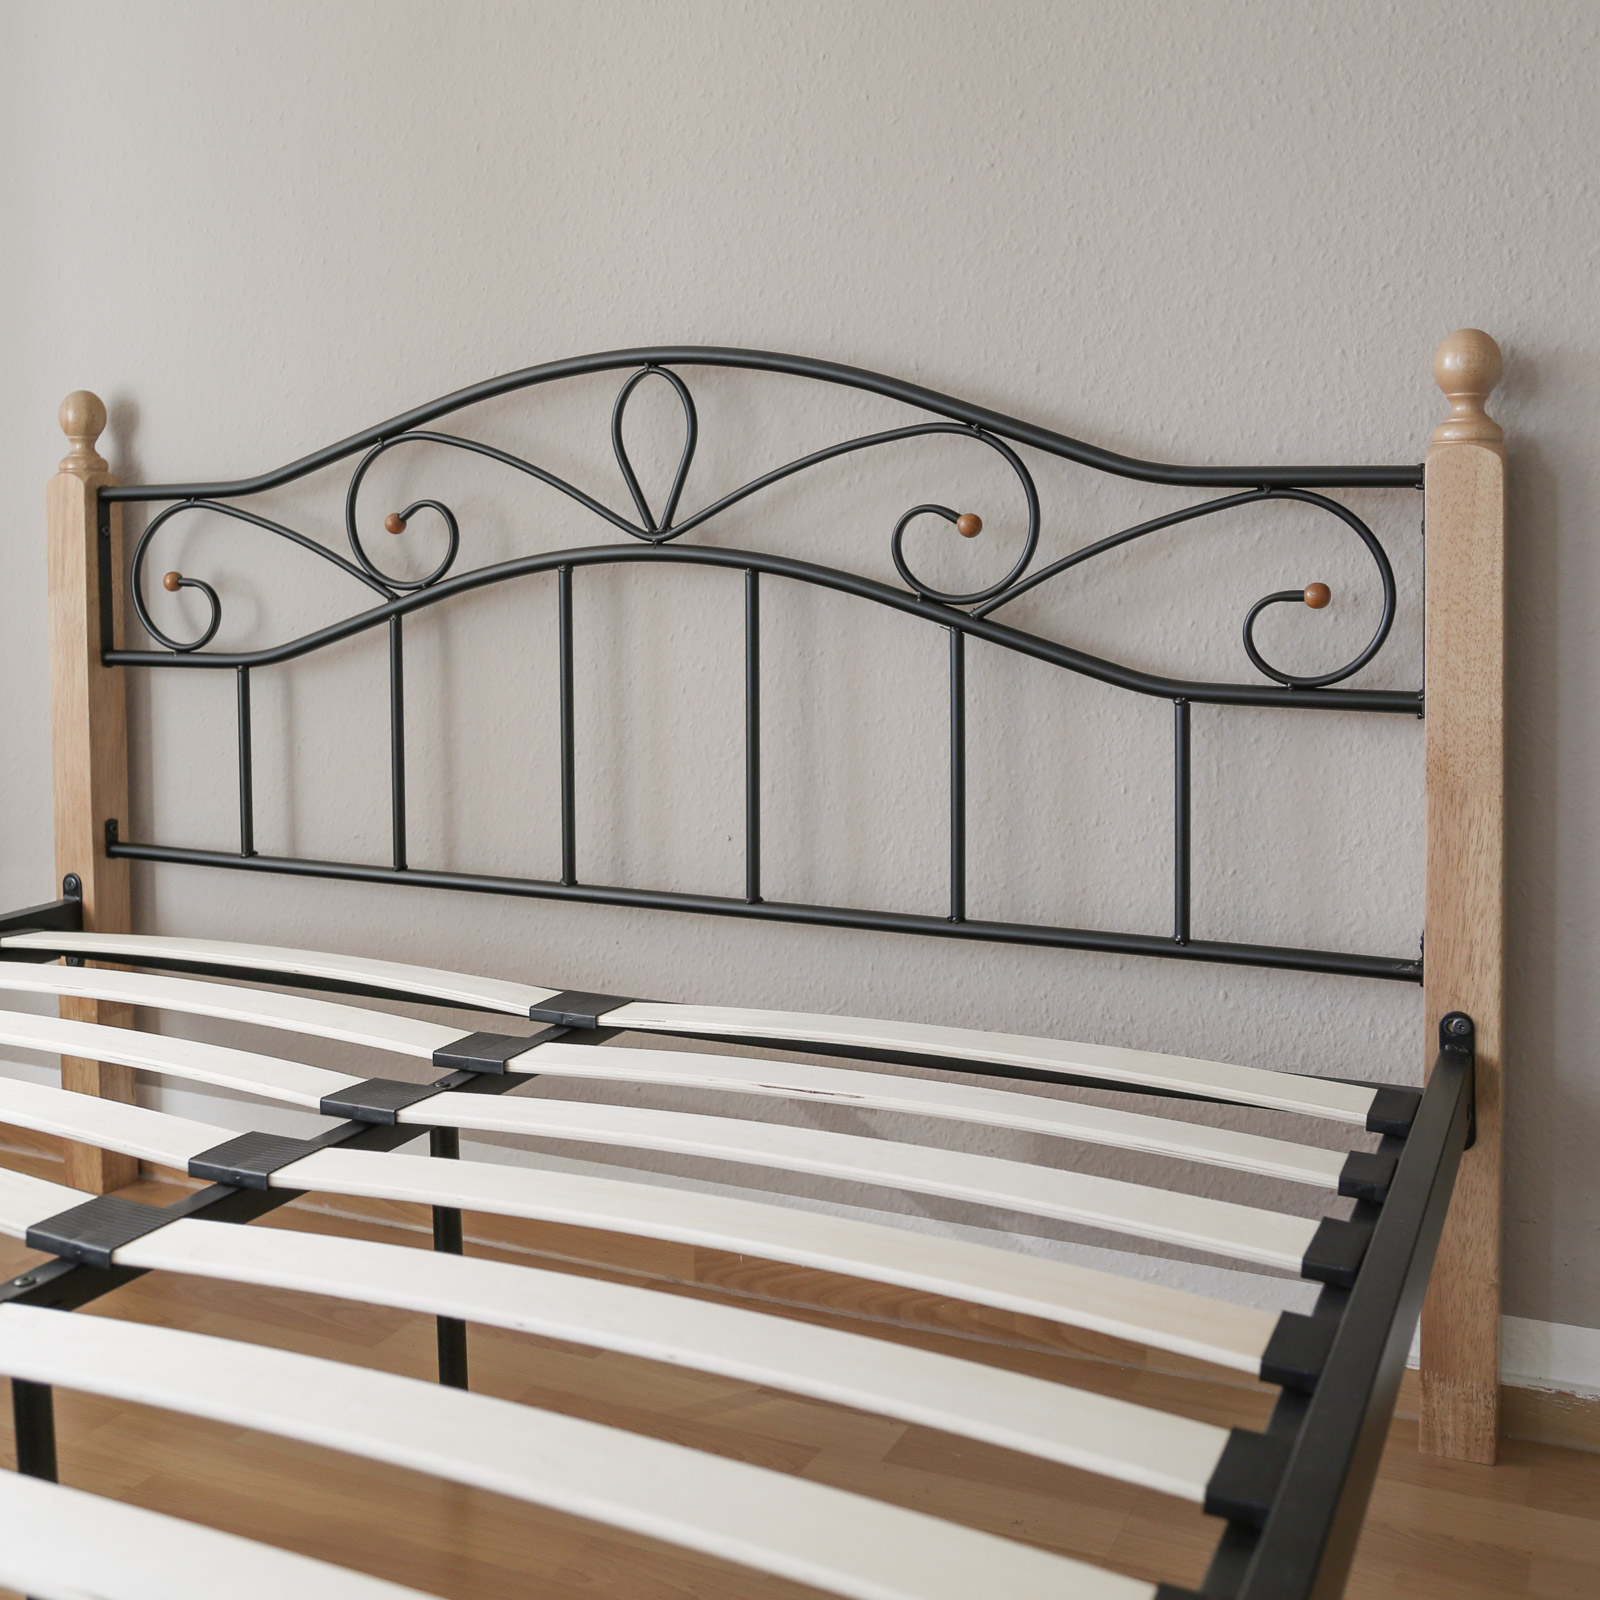 Metal Bed Iron Bed Double 160 x 200 Wood Slatted black natural bed frame 920